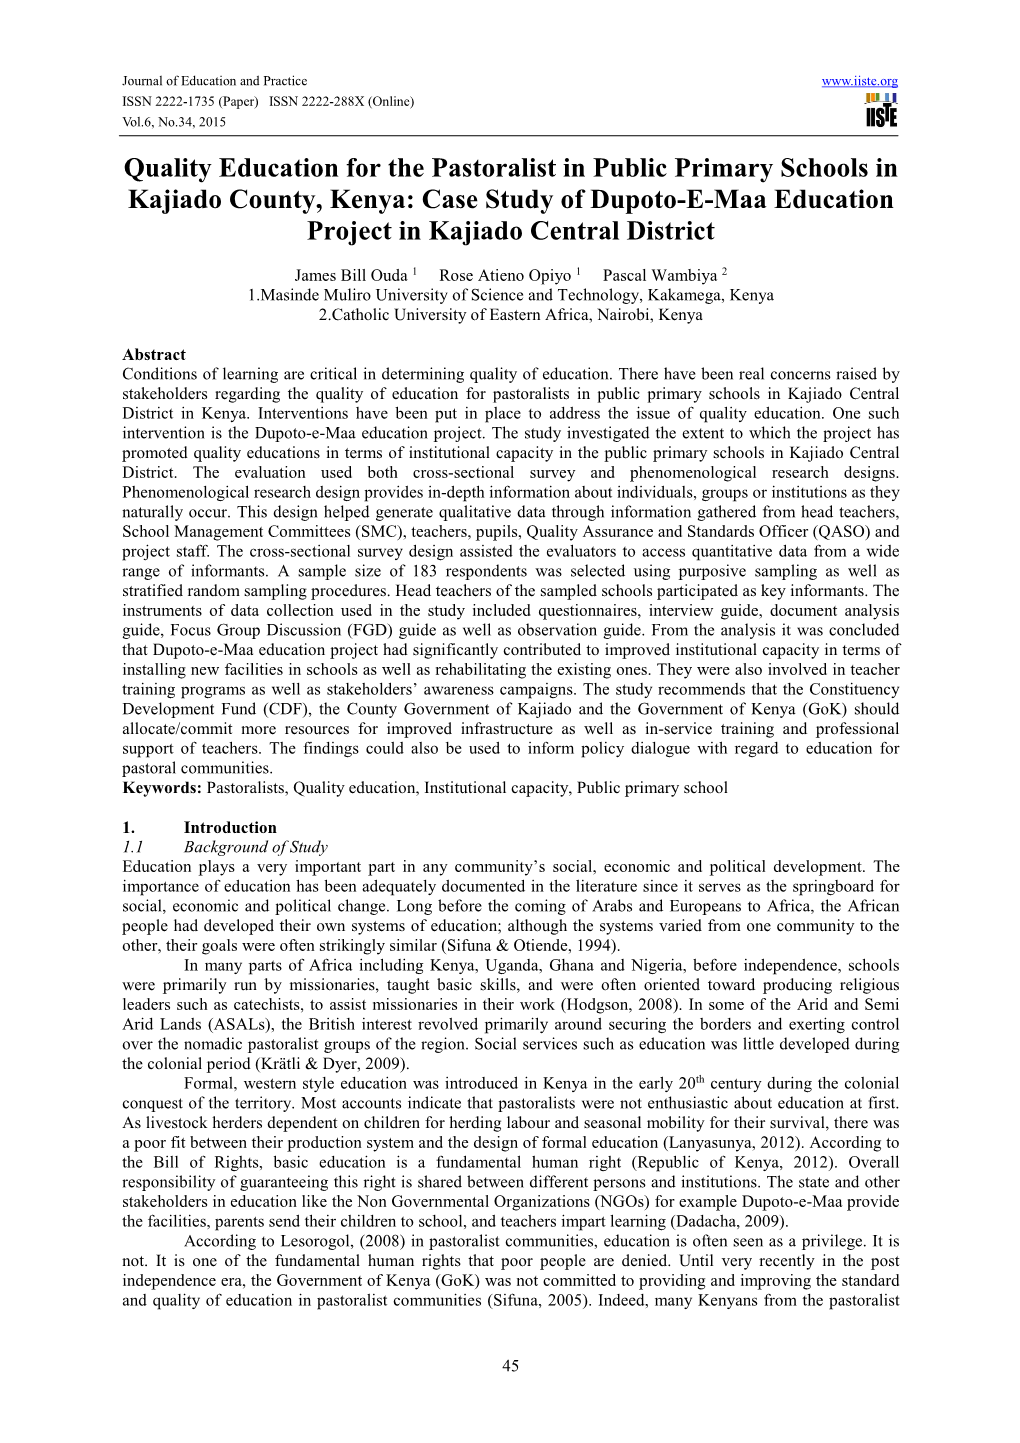 Quality Education for the Pastoralist in Public Primary Schools in Kajiado County, Kenya: Case Study of Dupoto-E-Maa Education Project in Kajiado Central District